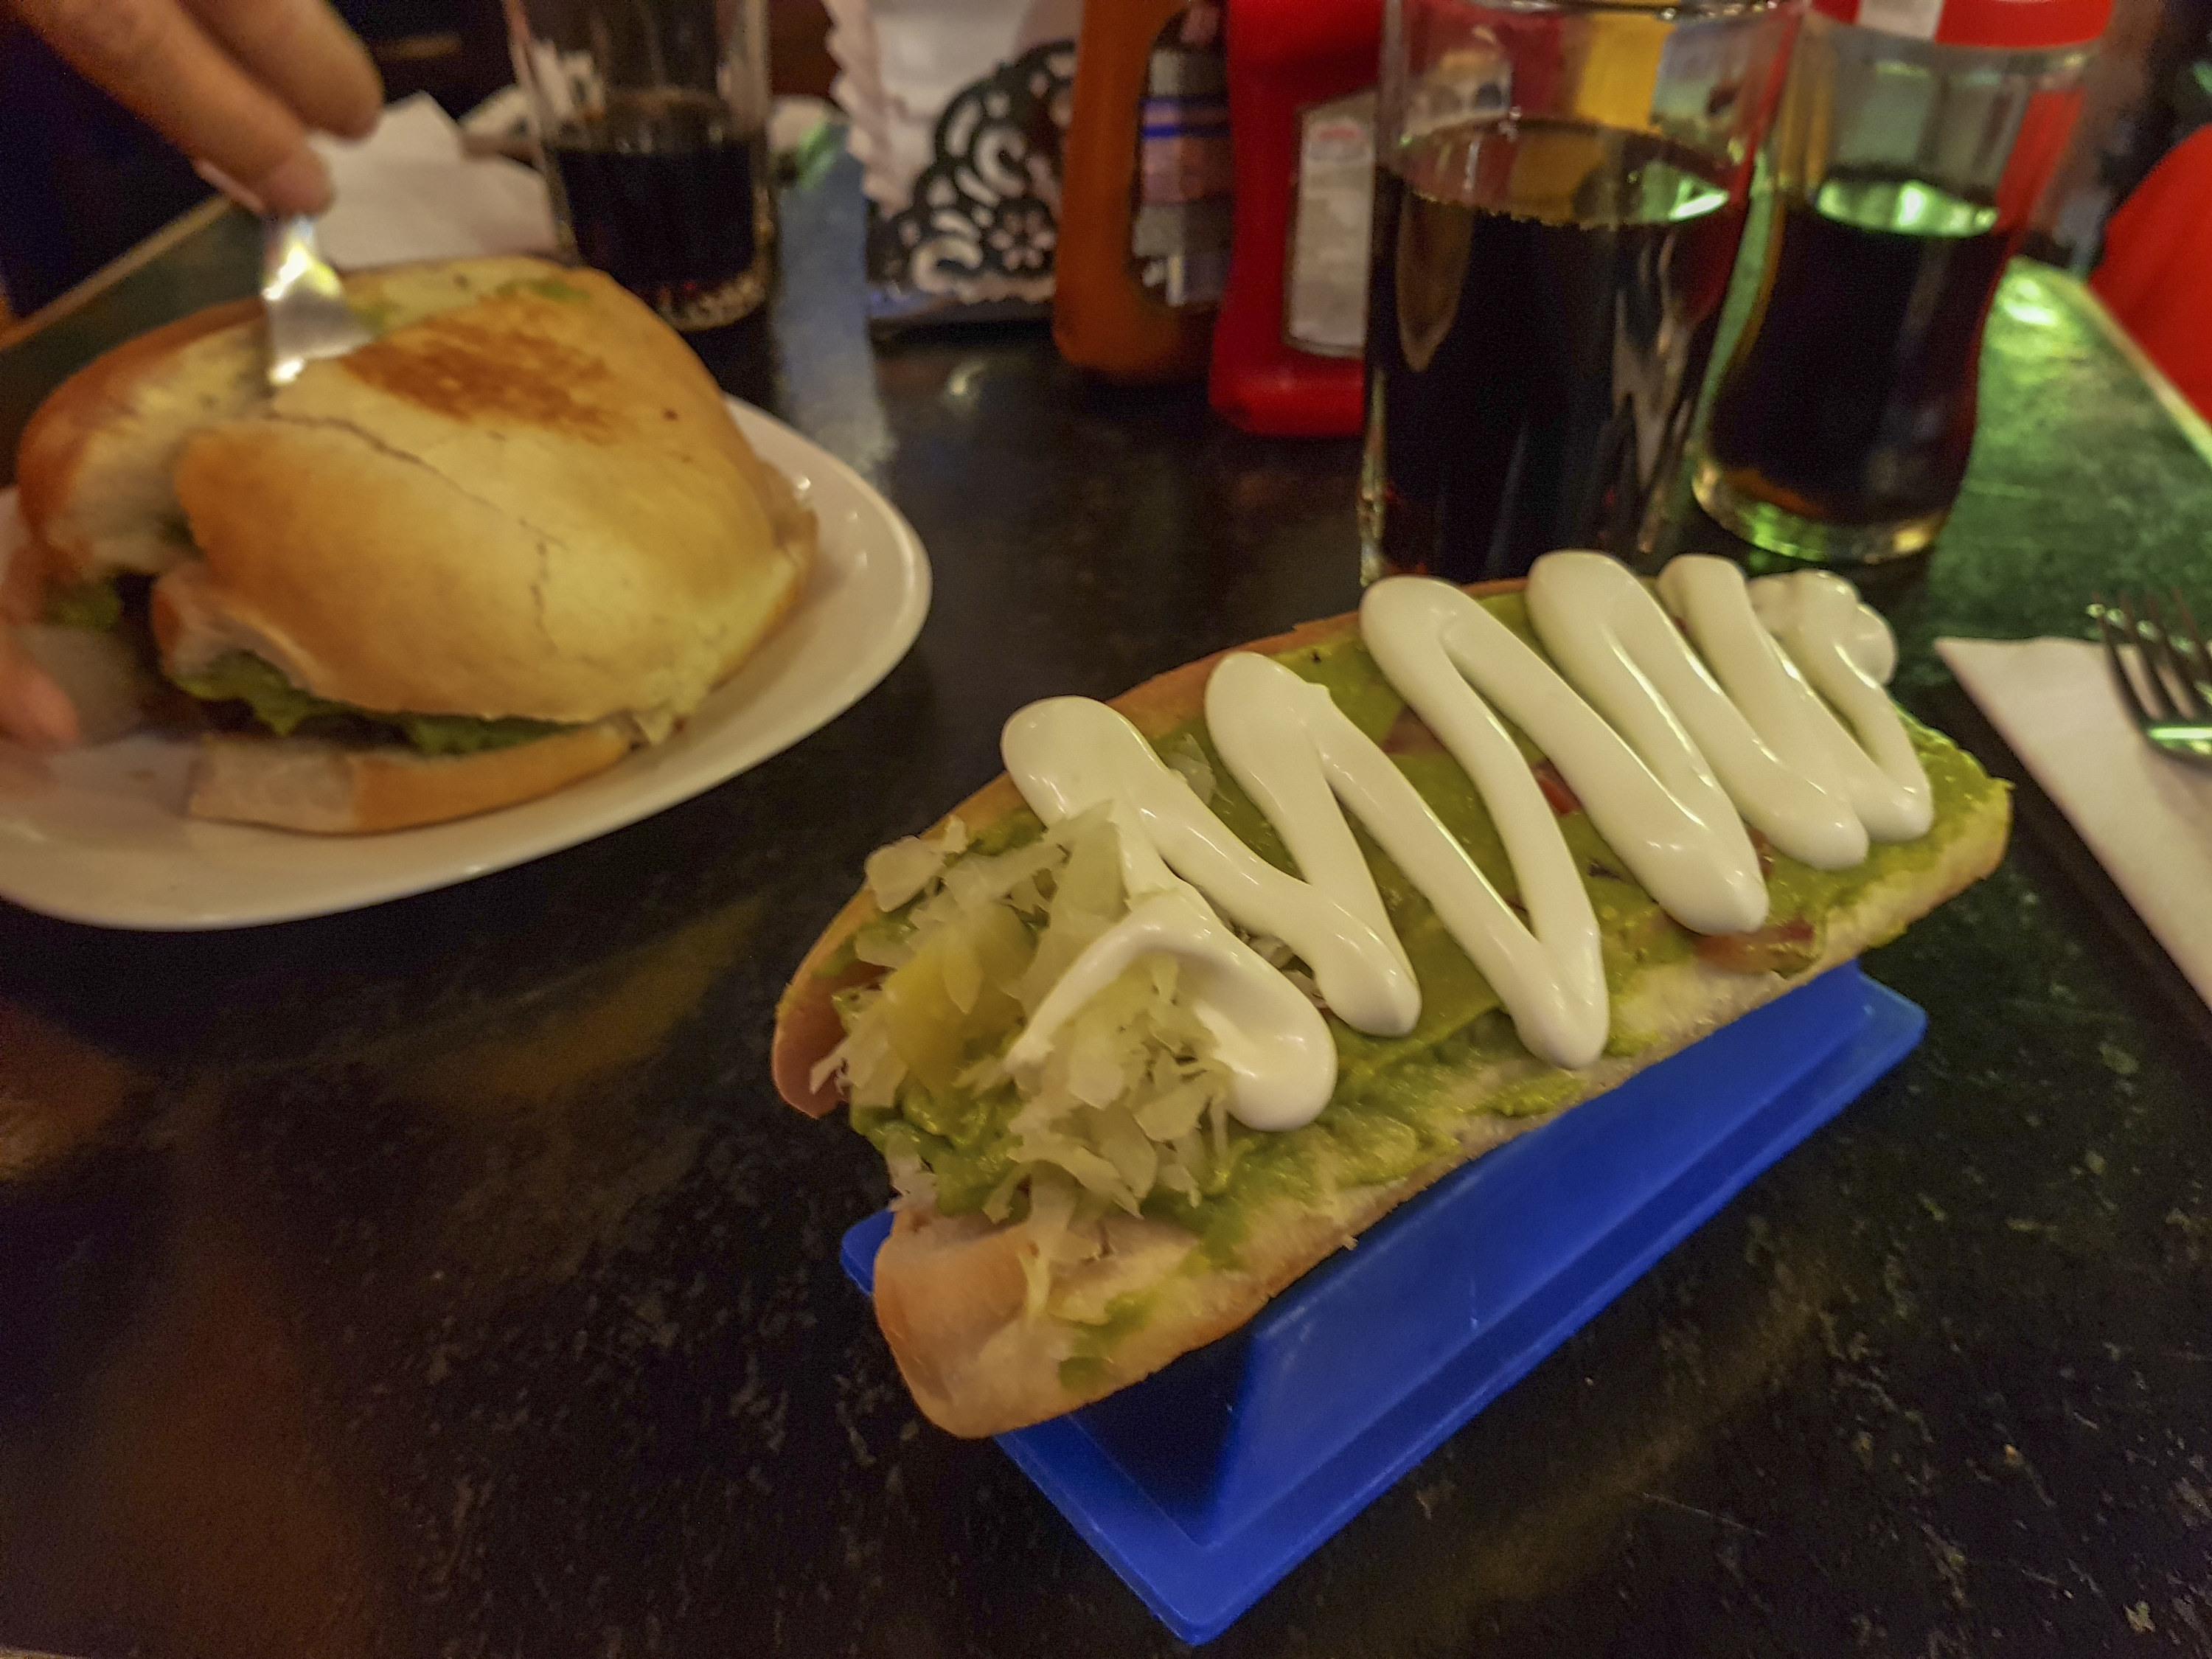 A hot dog with toppings